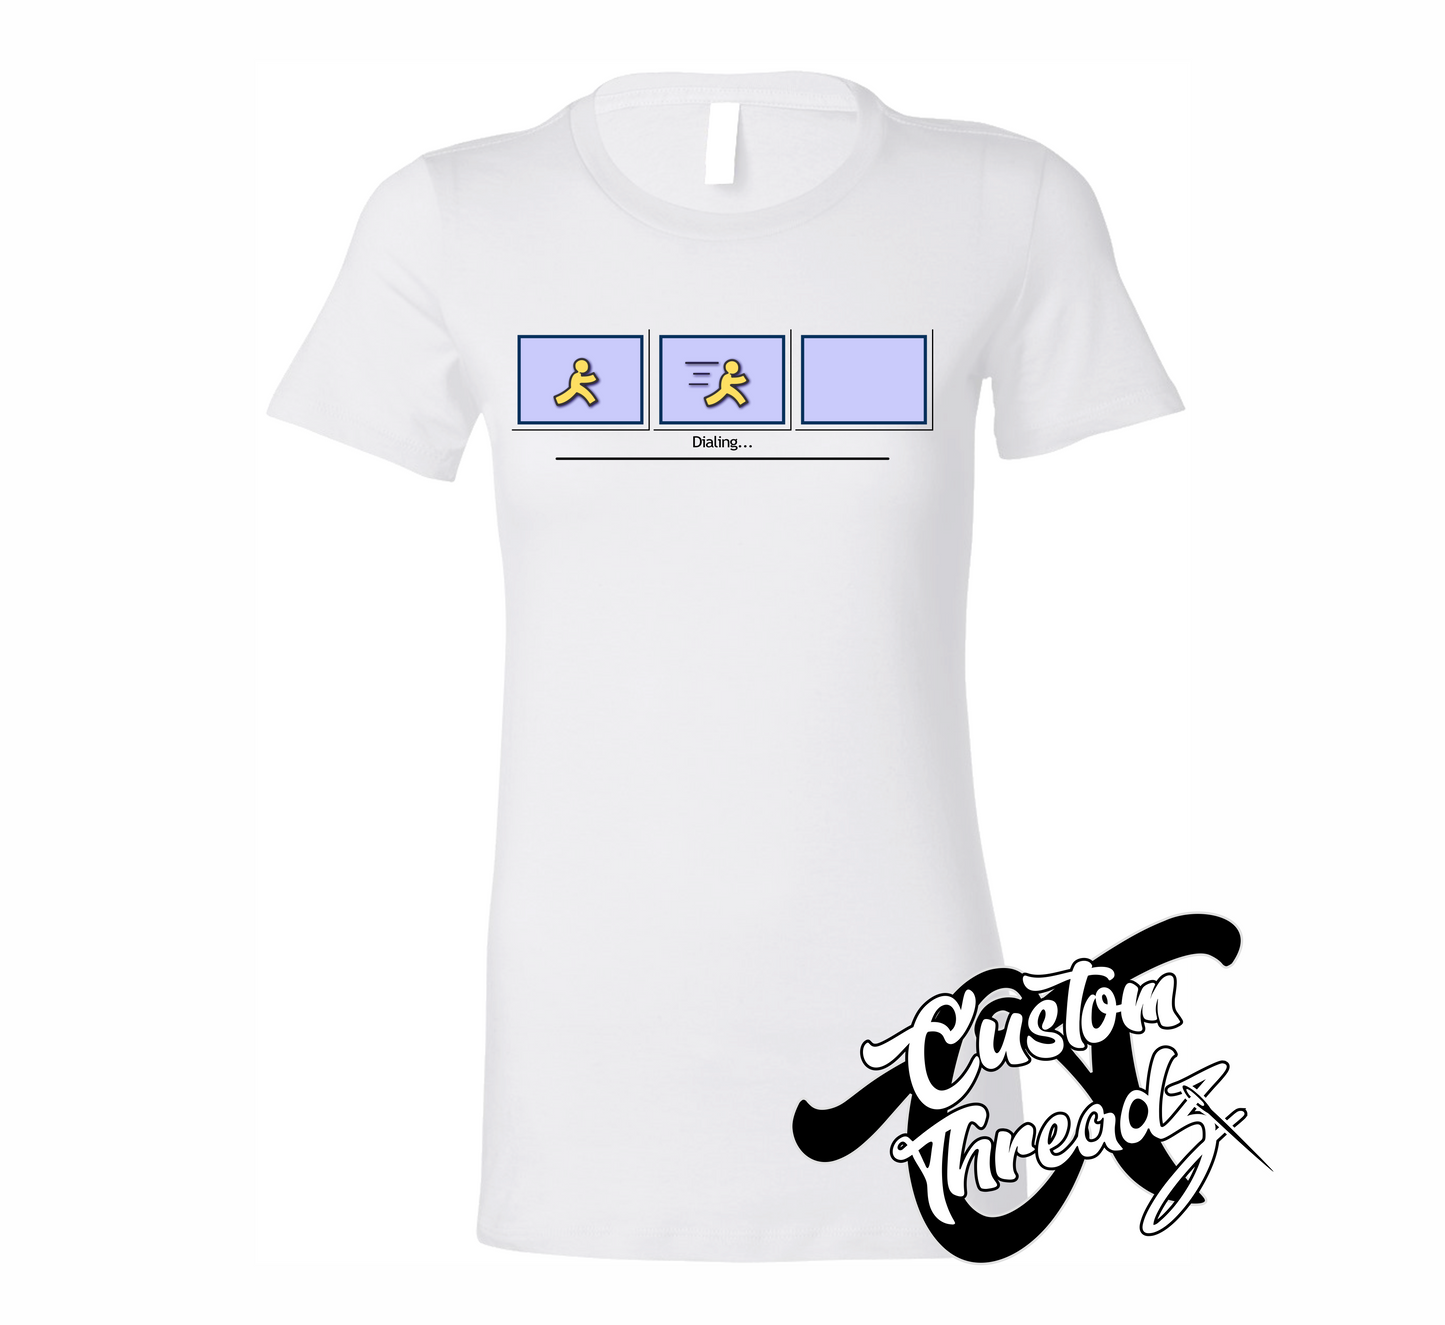 white womens tee with AOL dial up DTG printed design